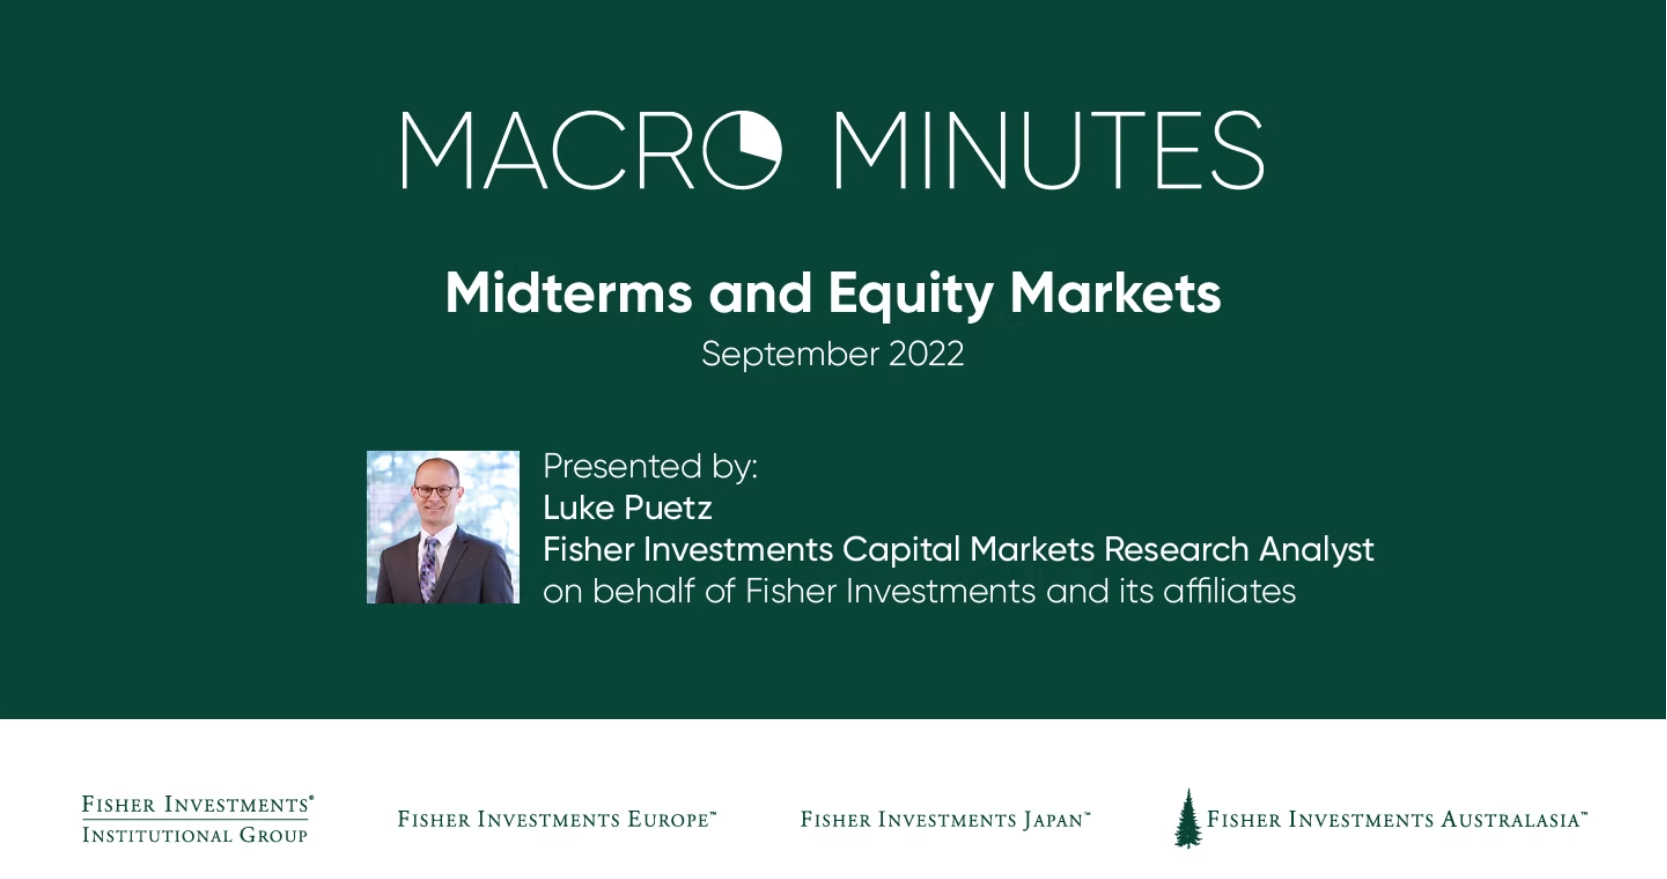 Macro Minutes: Midterms and Equity Markets